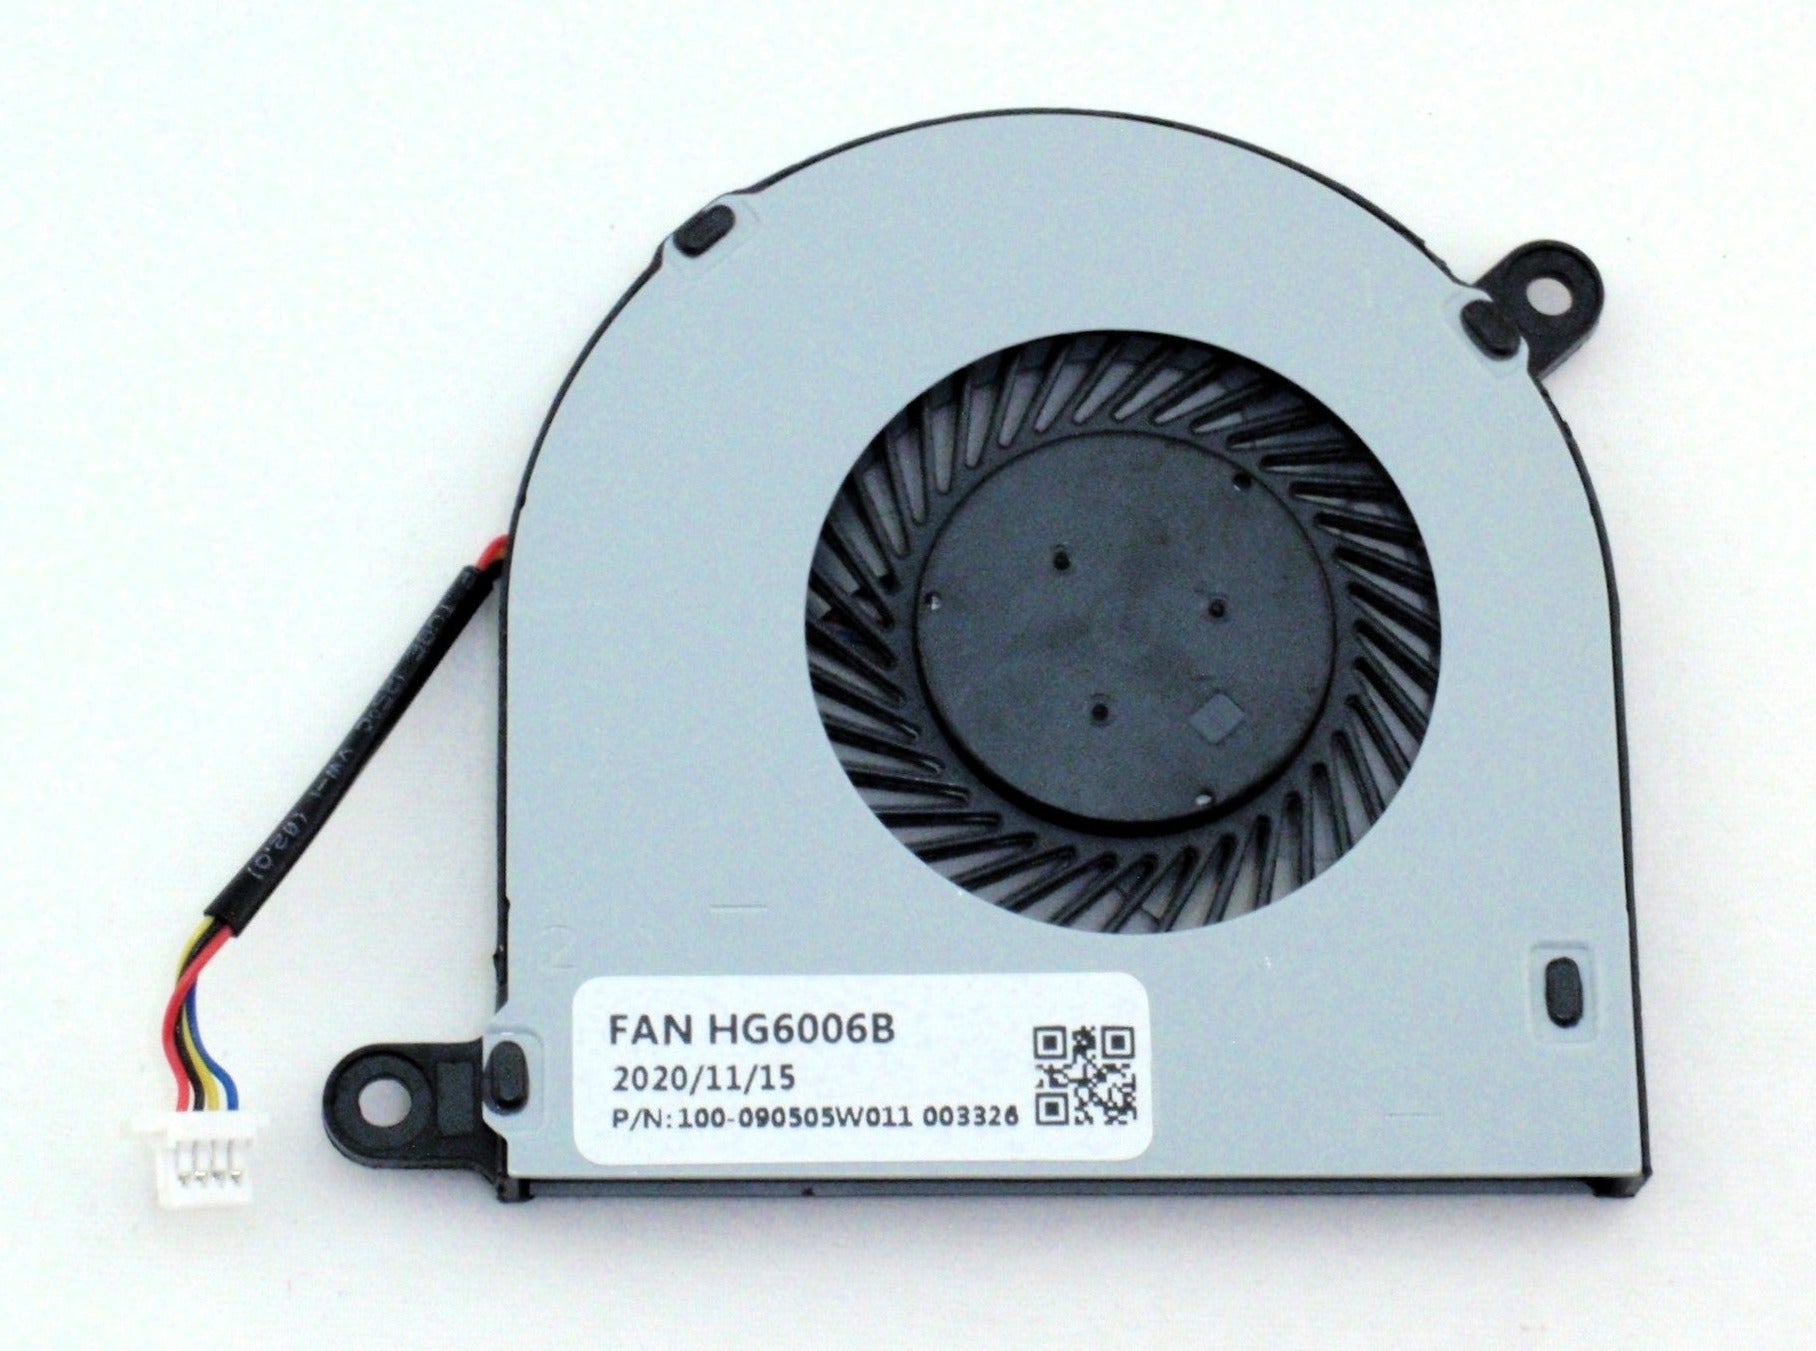 Dell New CPU Cooling Fan 031TPT Inspiron 13 5368 5378 5379 7368 7375 7378 7379 023.1006M.0001 0011 DFB451005M20T-FHJD 31TPT